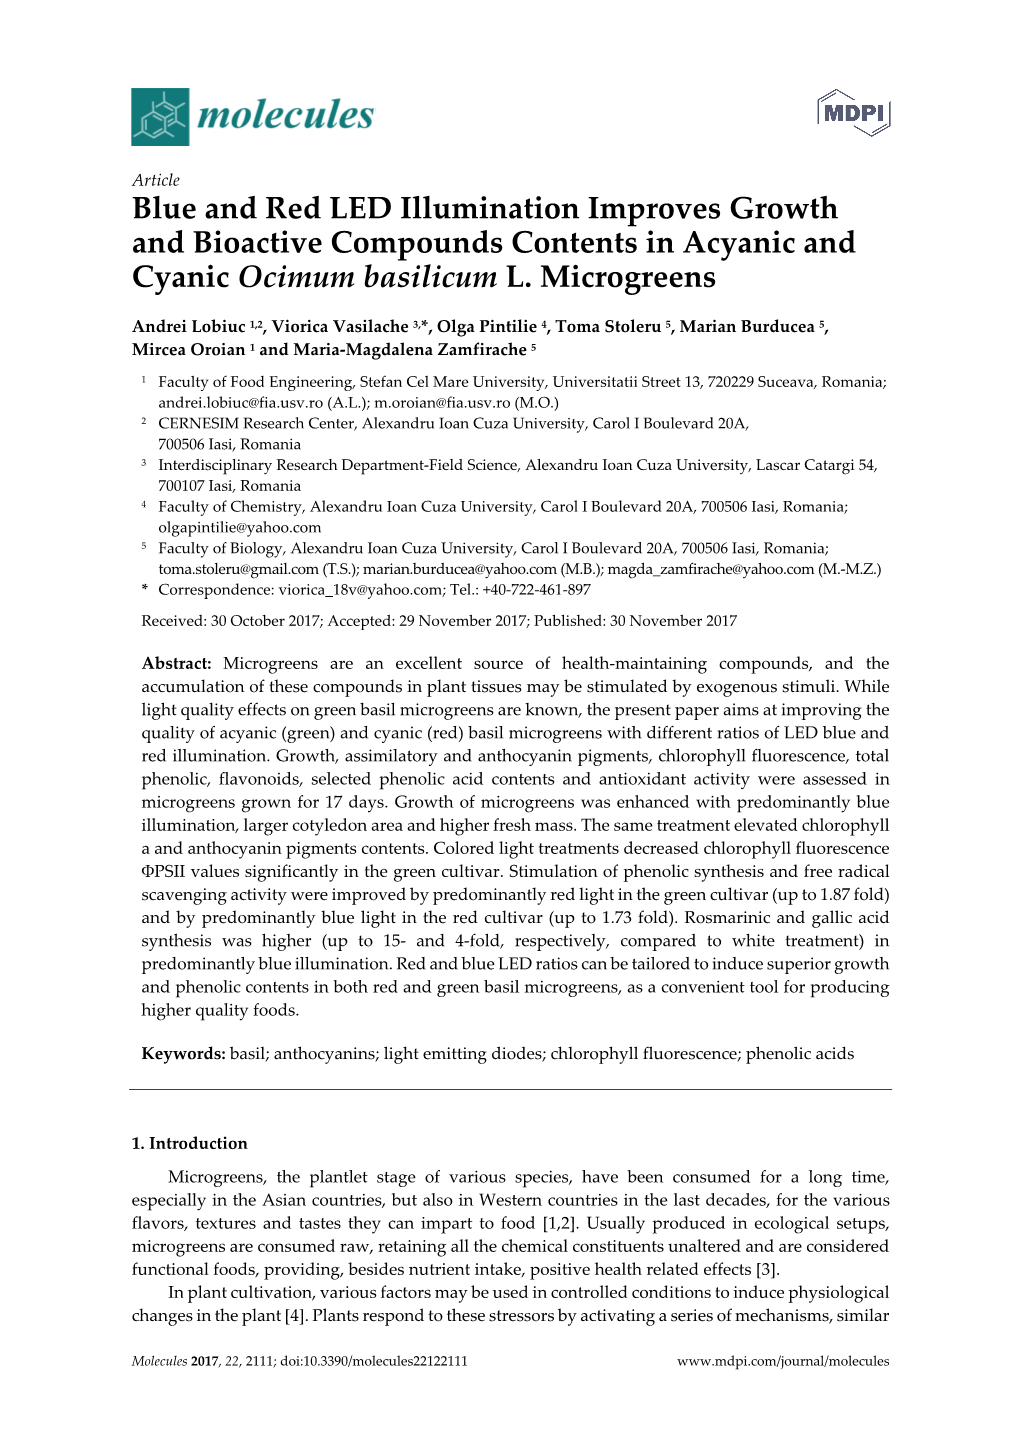 Blue and Red LED Illumination Improves Growth and Bioactive Compounds Contents in Acyanic and Cyanic Ocimum Basilicum L